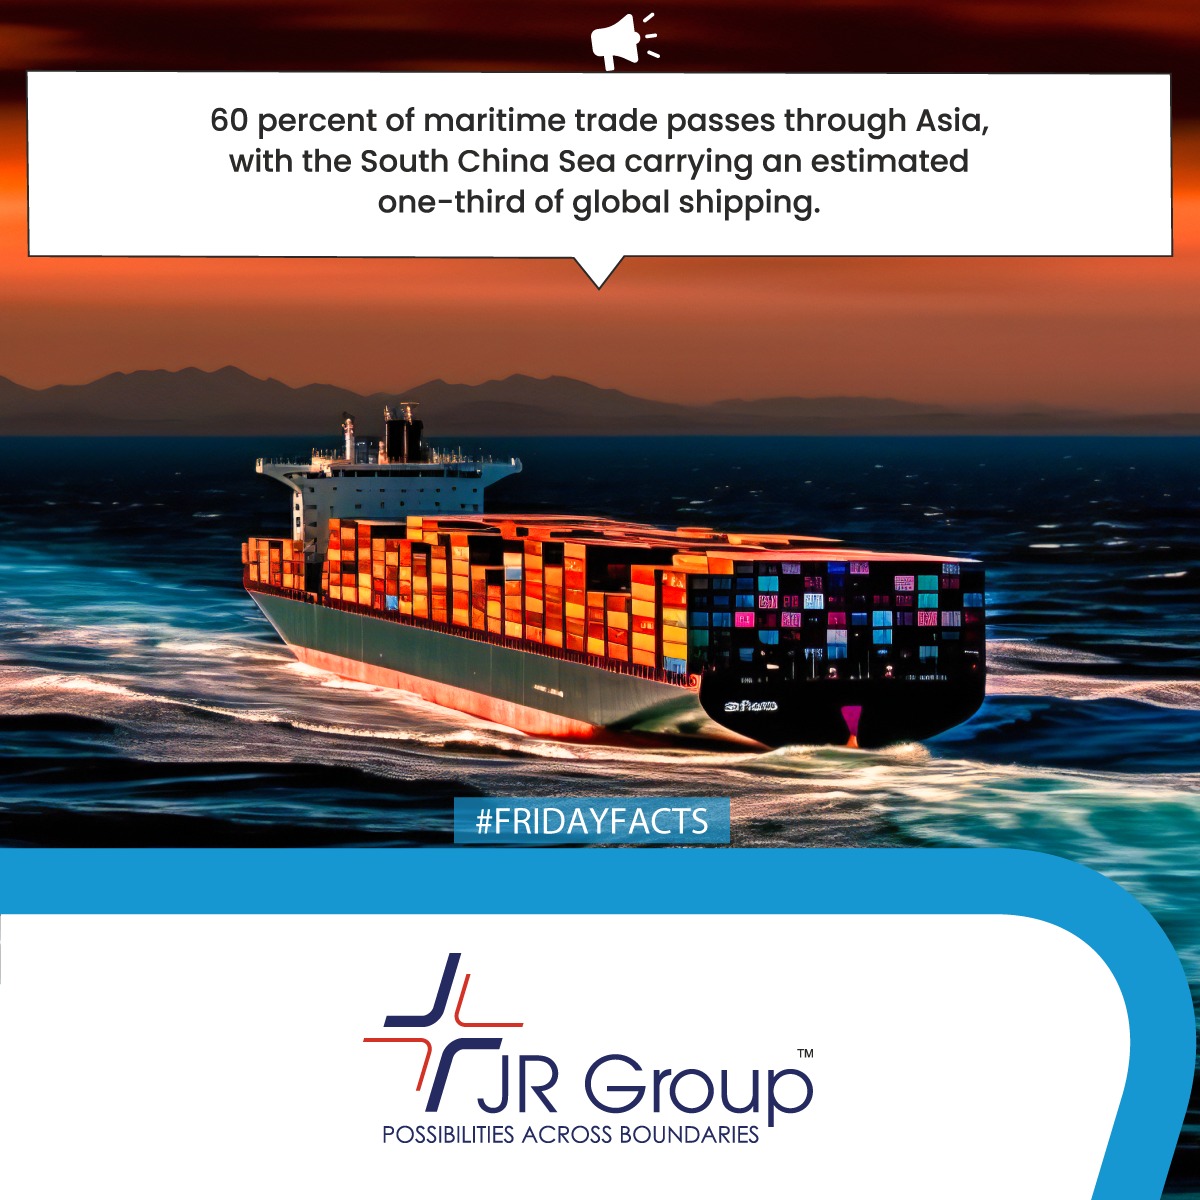 Dominance of Asia..!

#Possibilitiesacrossboundaries #JRgroup #Possible #India #Logistics #Shipping #Petroleum #Corporate #Possibility #possibilities #Gobeyond #Focus #focusonpossible #Fact #FridayFacts